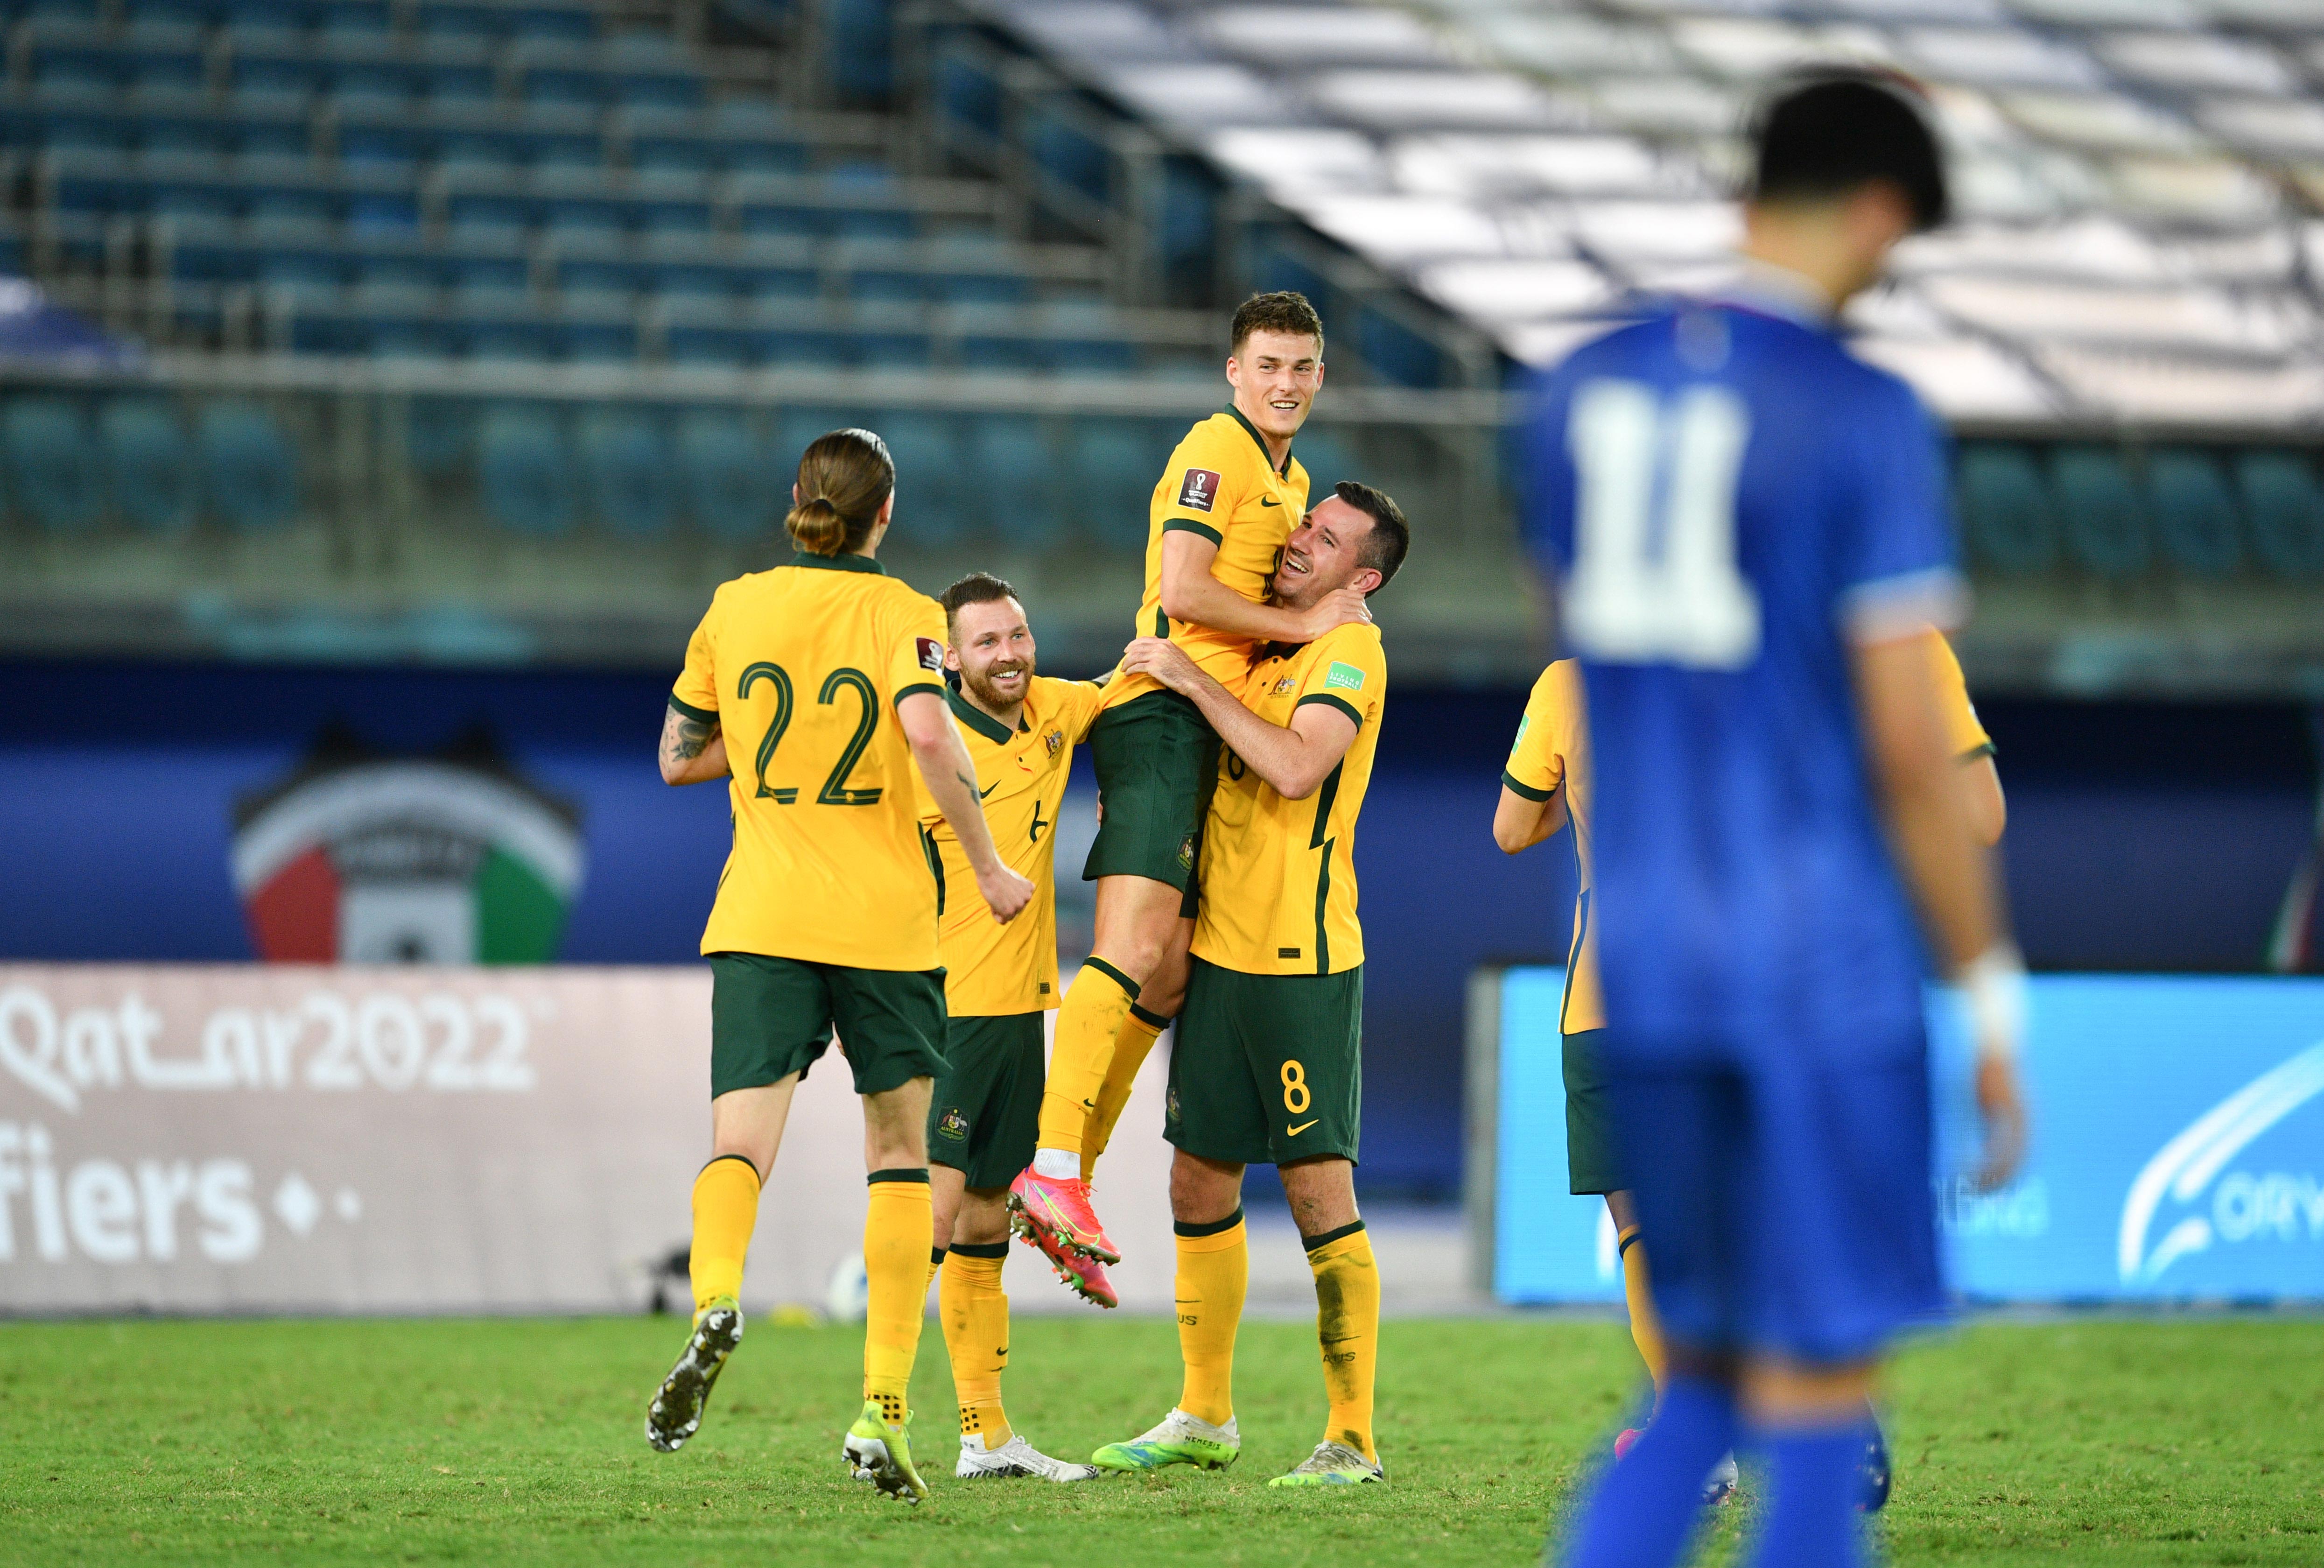 Gallery: The Socceroos advance in FIFA World Cup Qualifying with perfect record - Socceroos